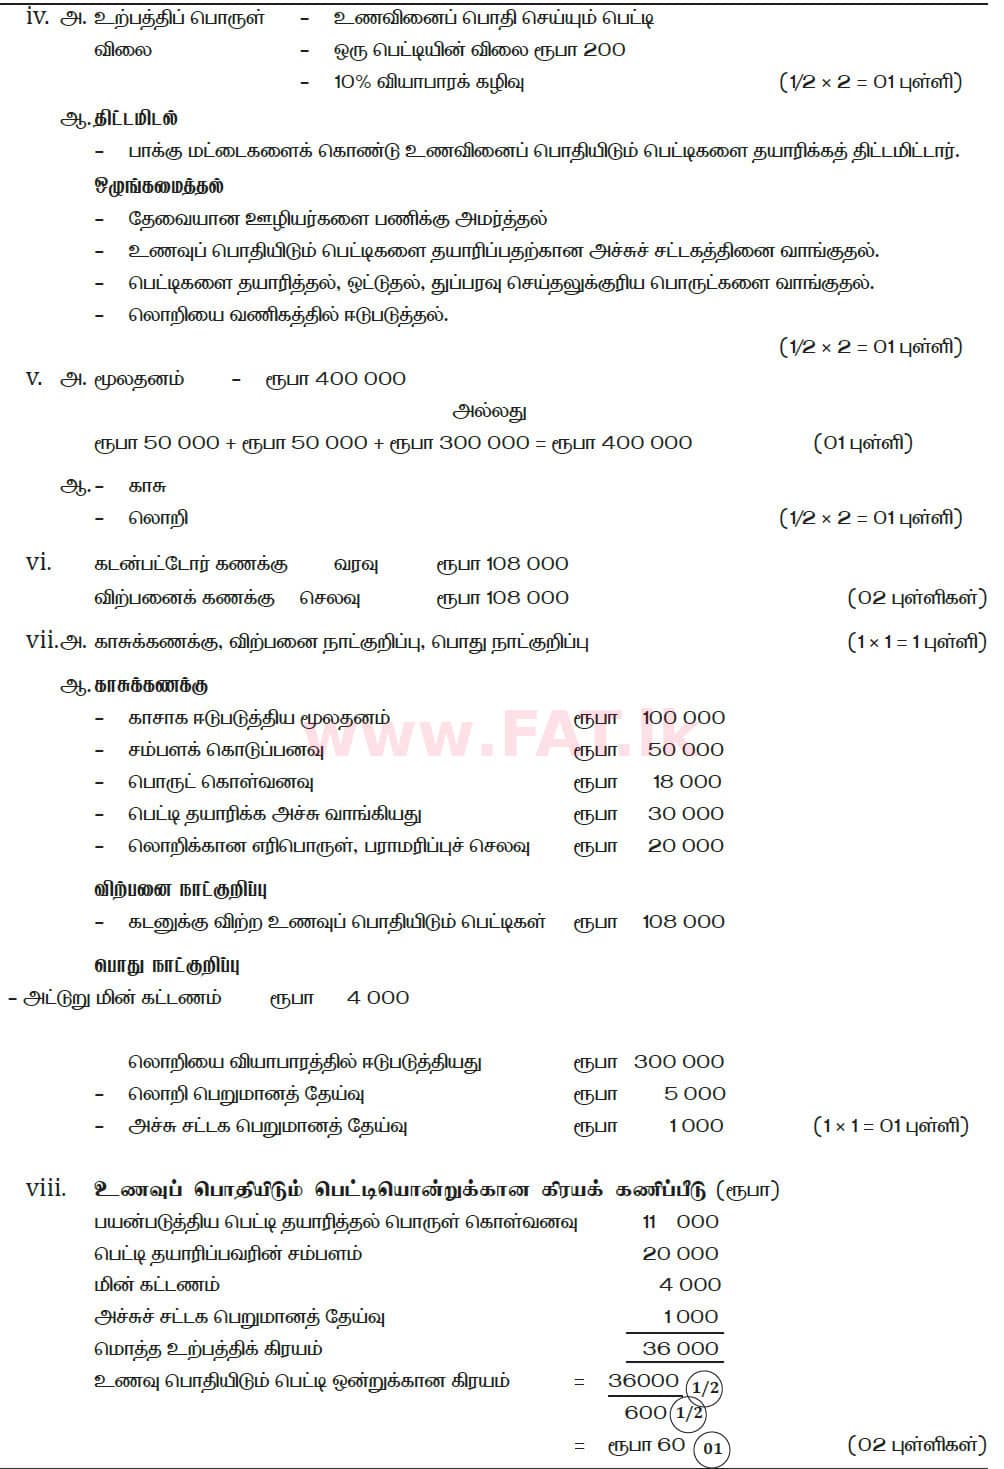 National Syllabus : Ordinary Level (O/L) Business and Accounting Studies - 2020 March - Paper II (தமிழ் Medium) 1 5777